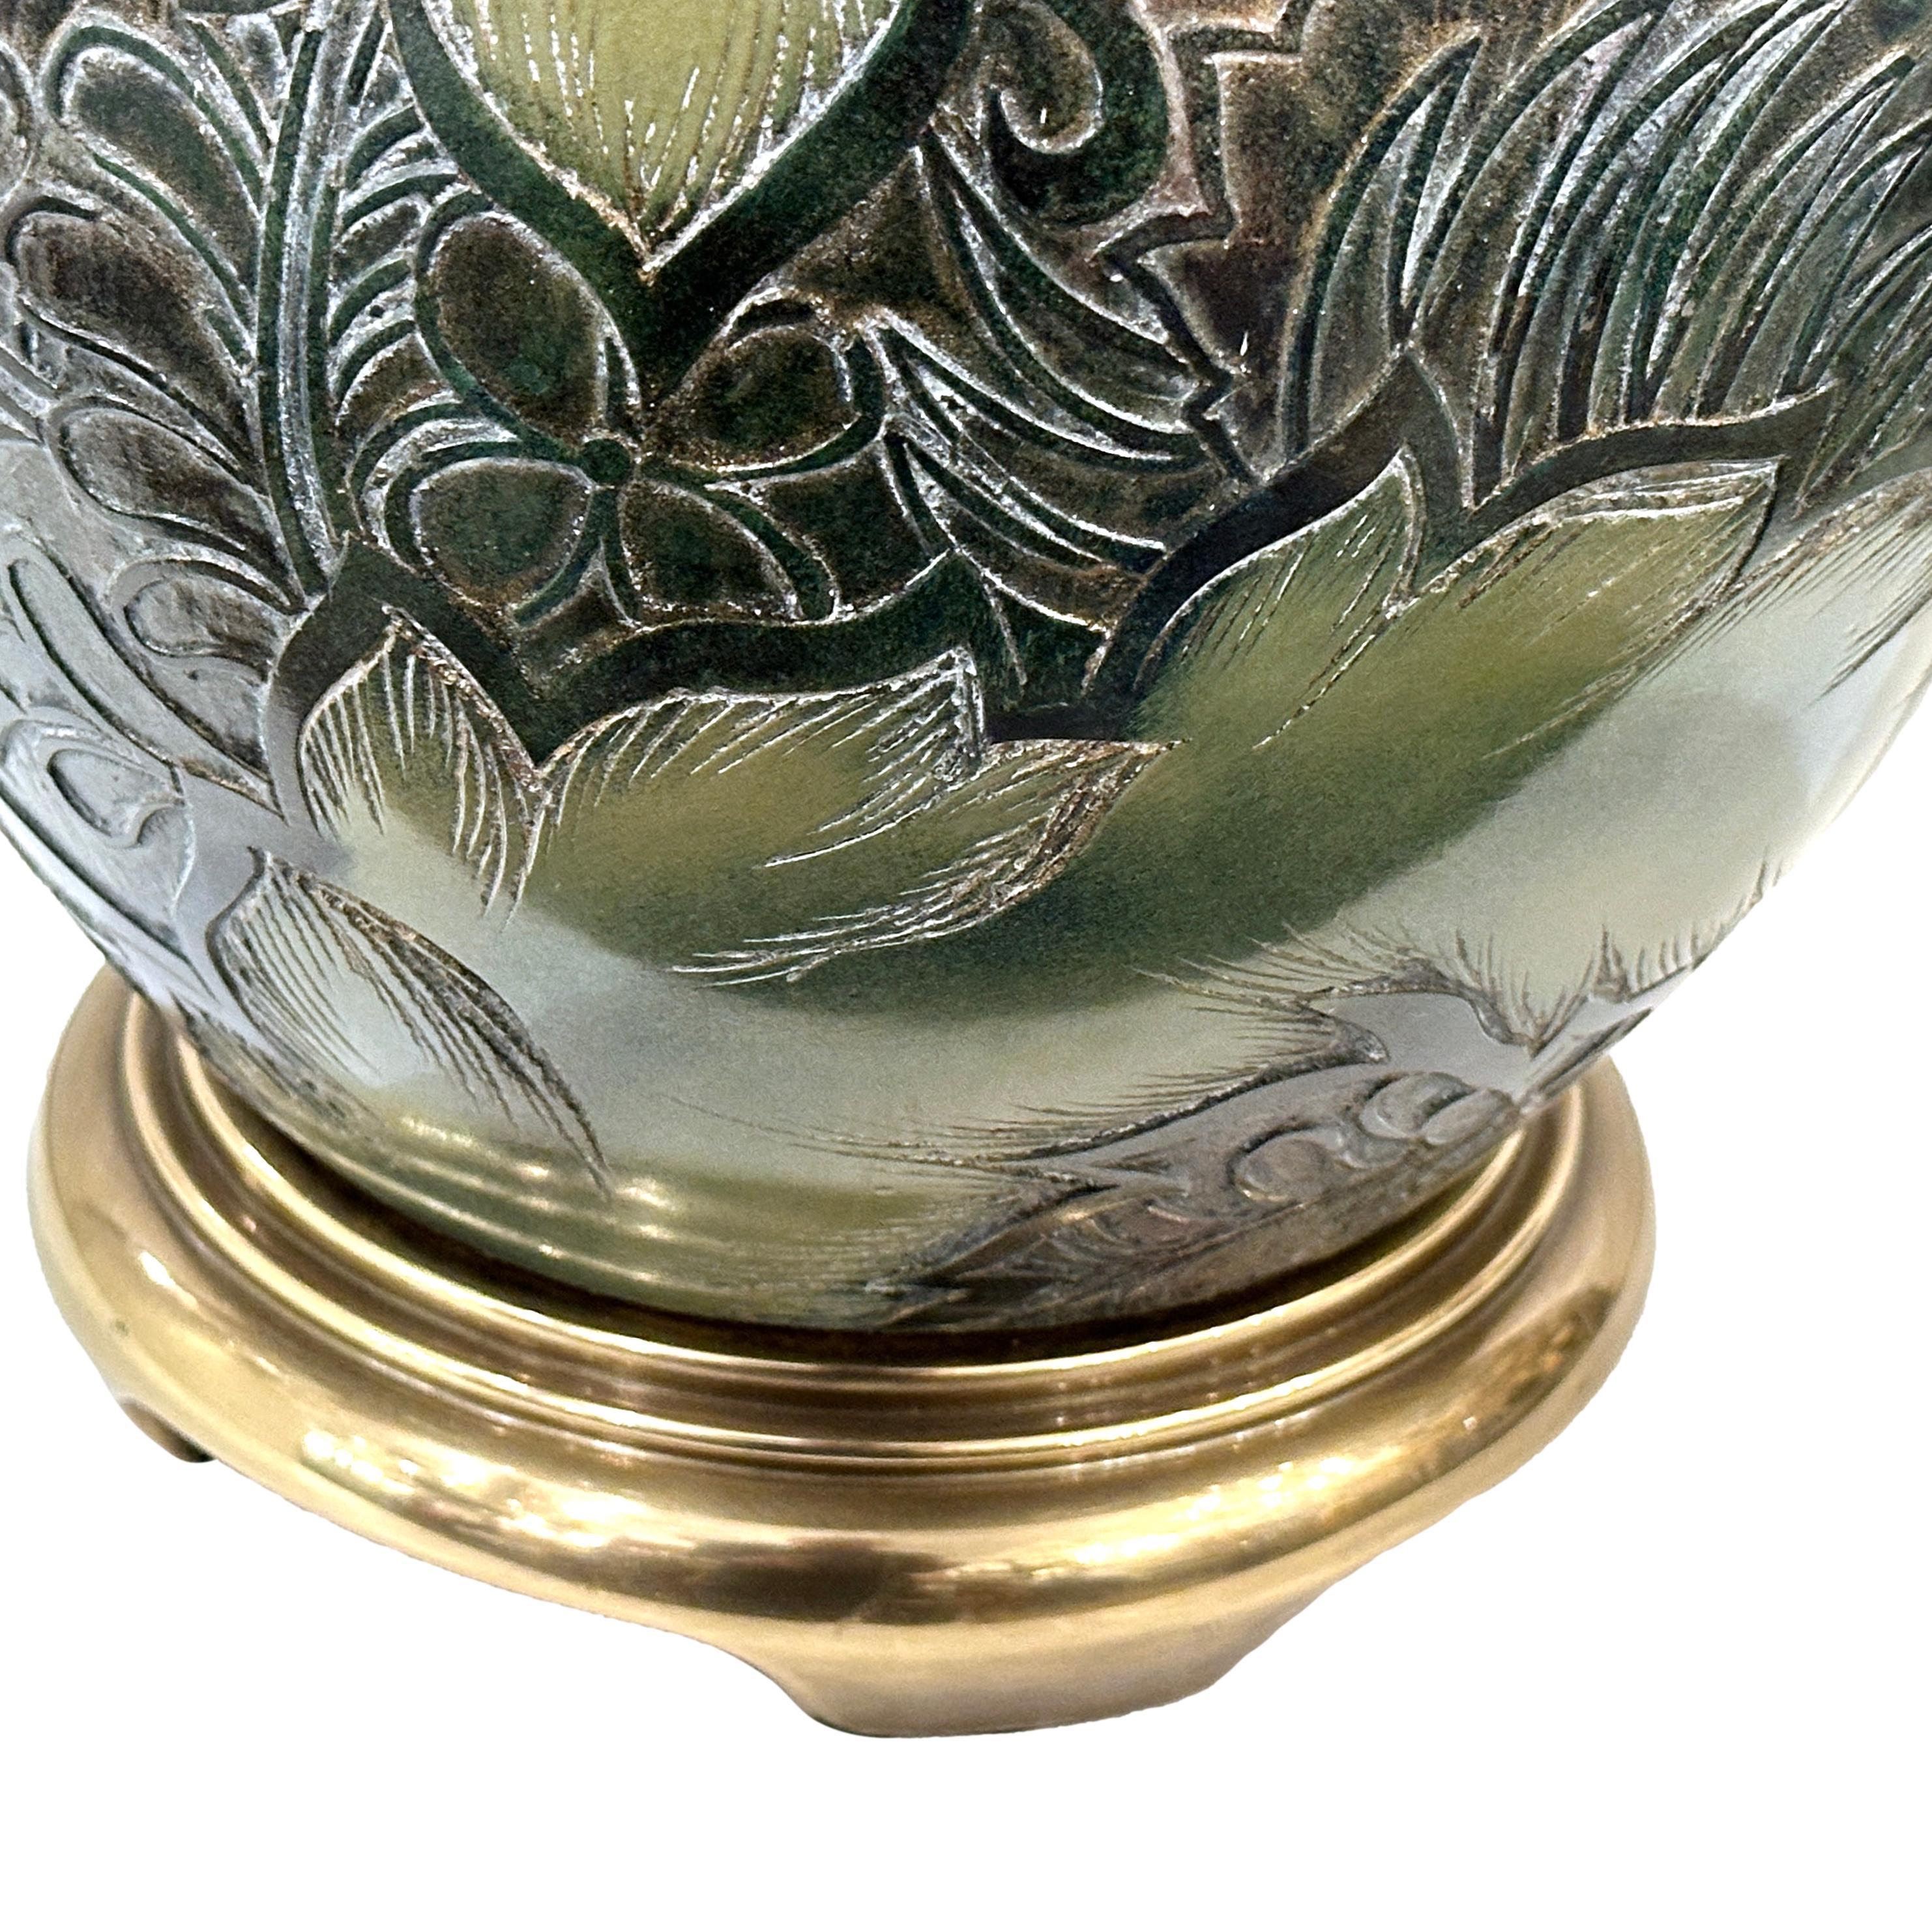 Porcelain Table Lamp with Foliage Motif For Sale 1